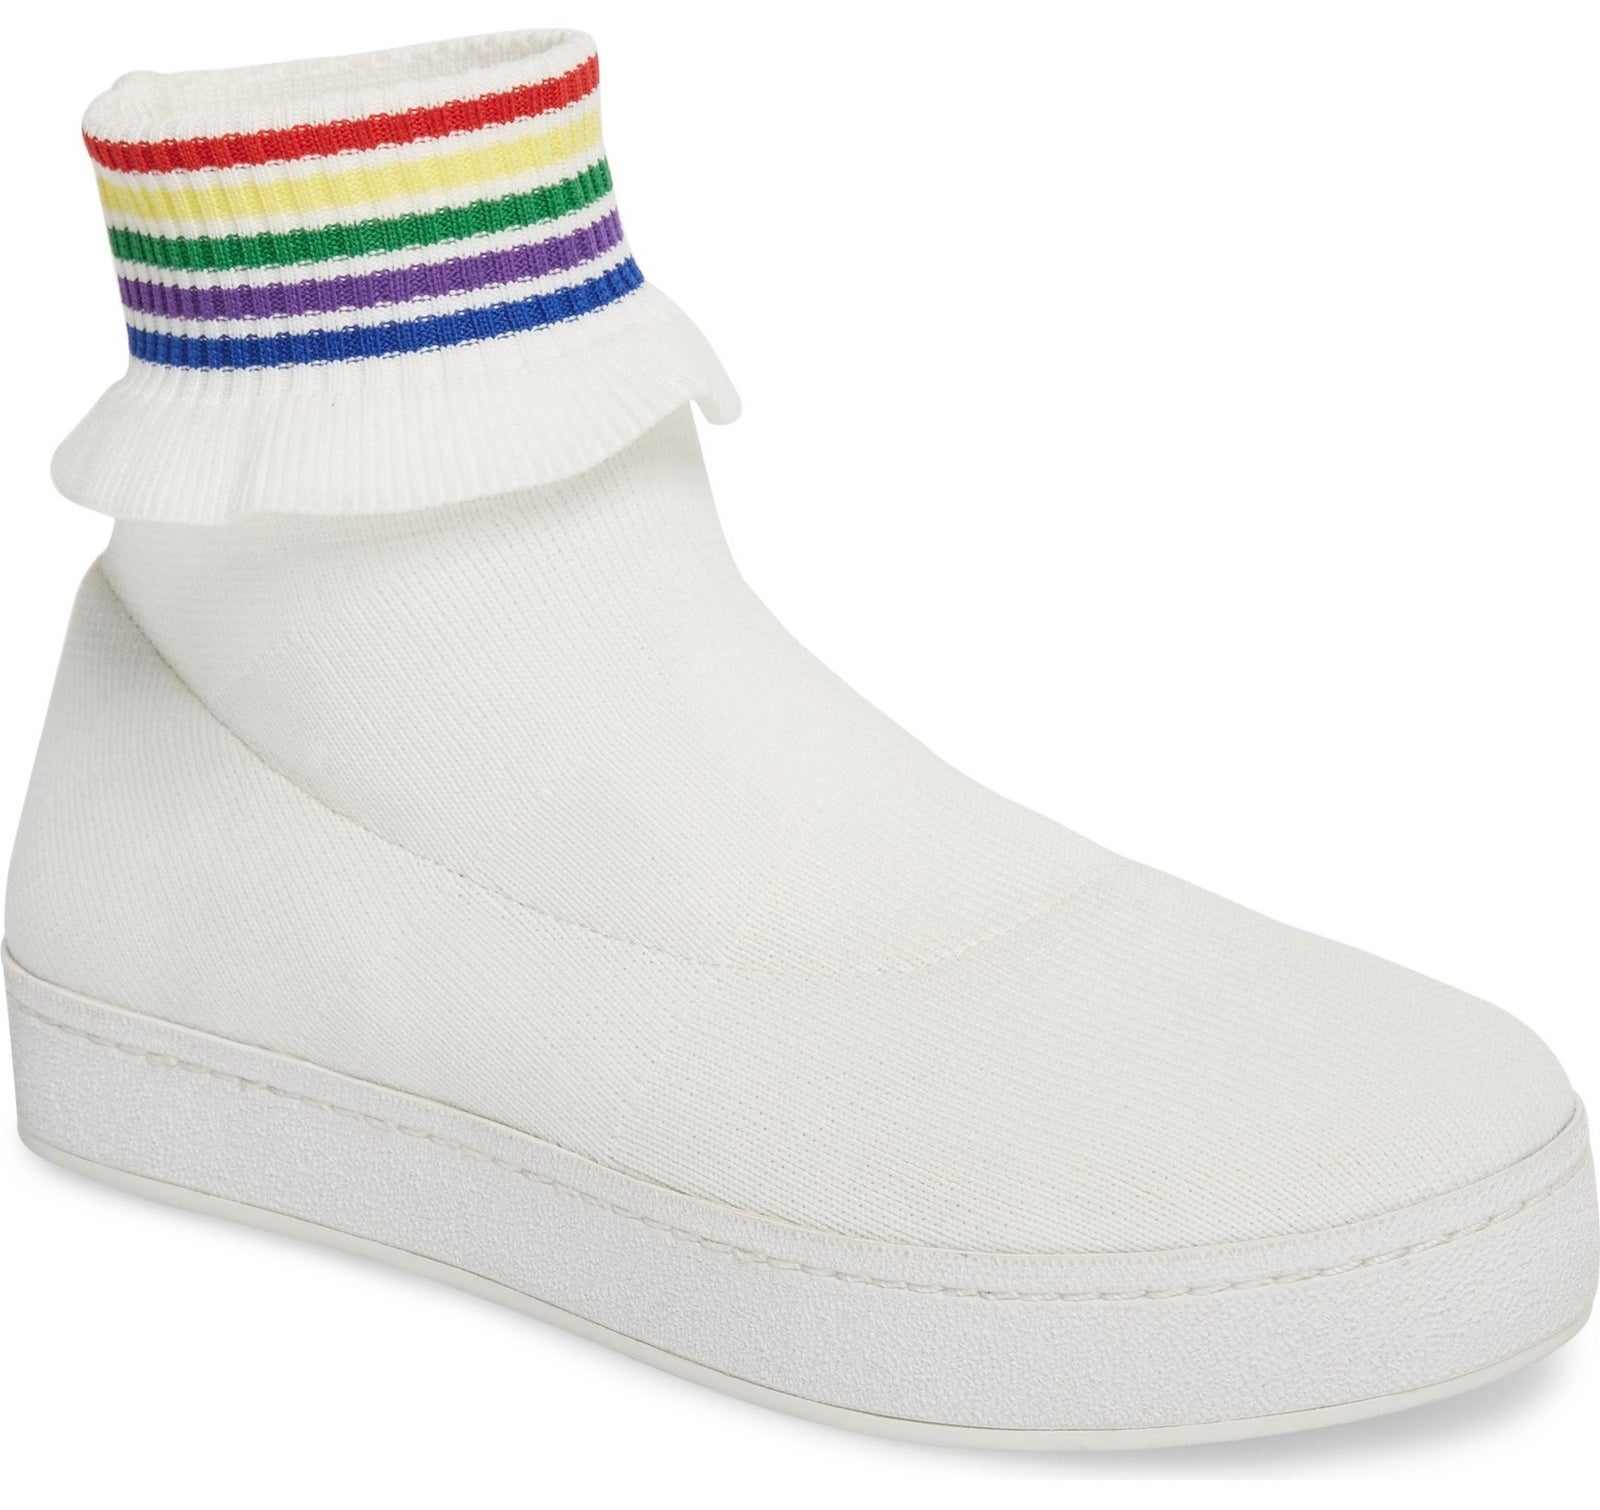 19 Pairs Of Comfy AF Sock Sneakers For Anyone Without A Balenciaga Budget